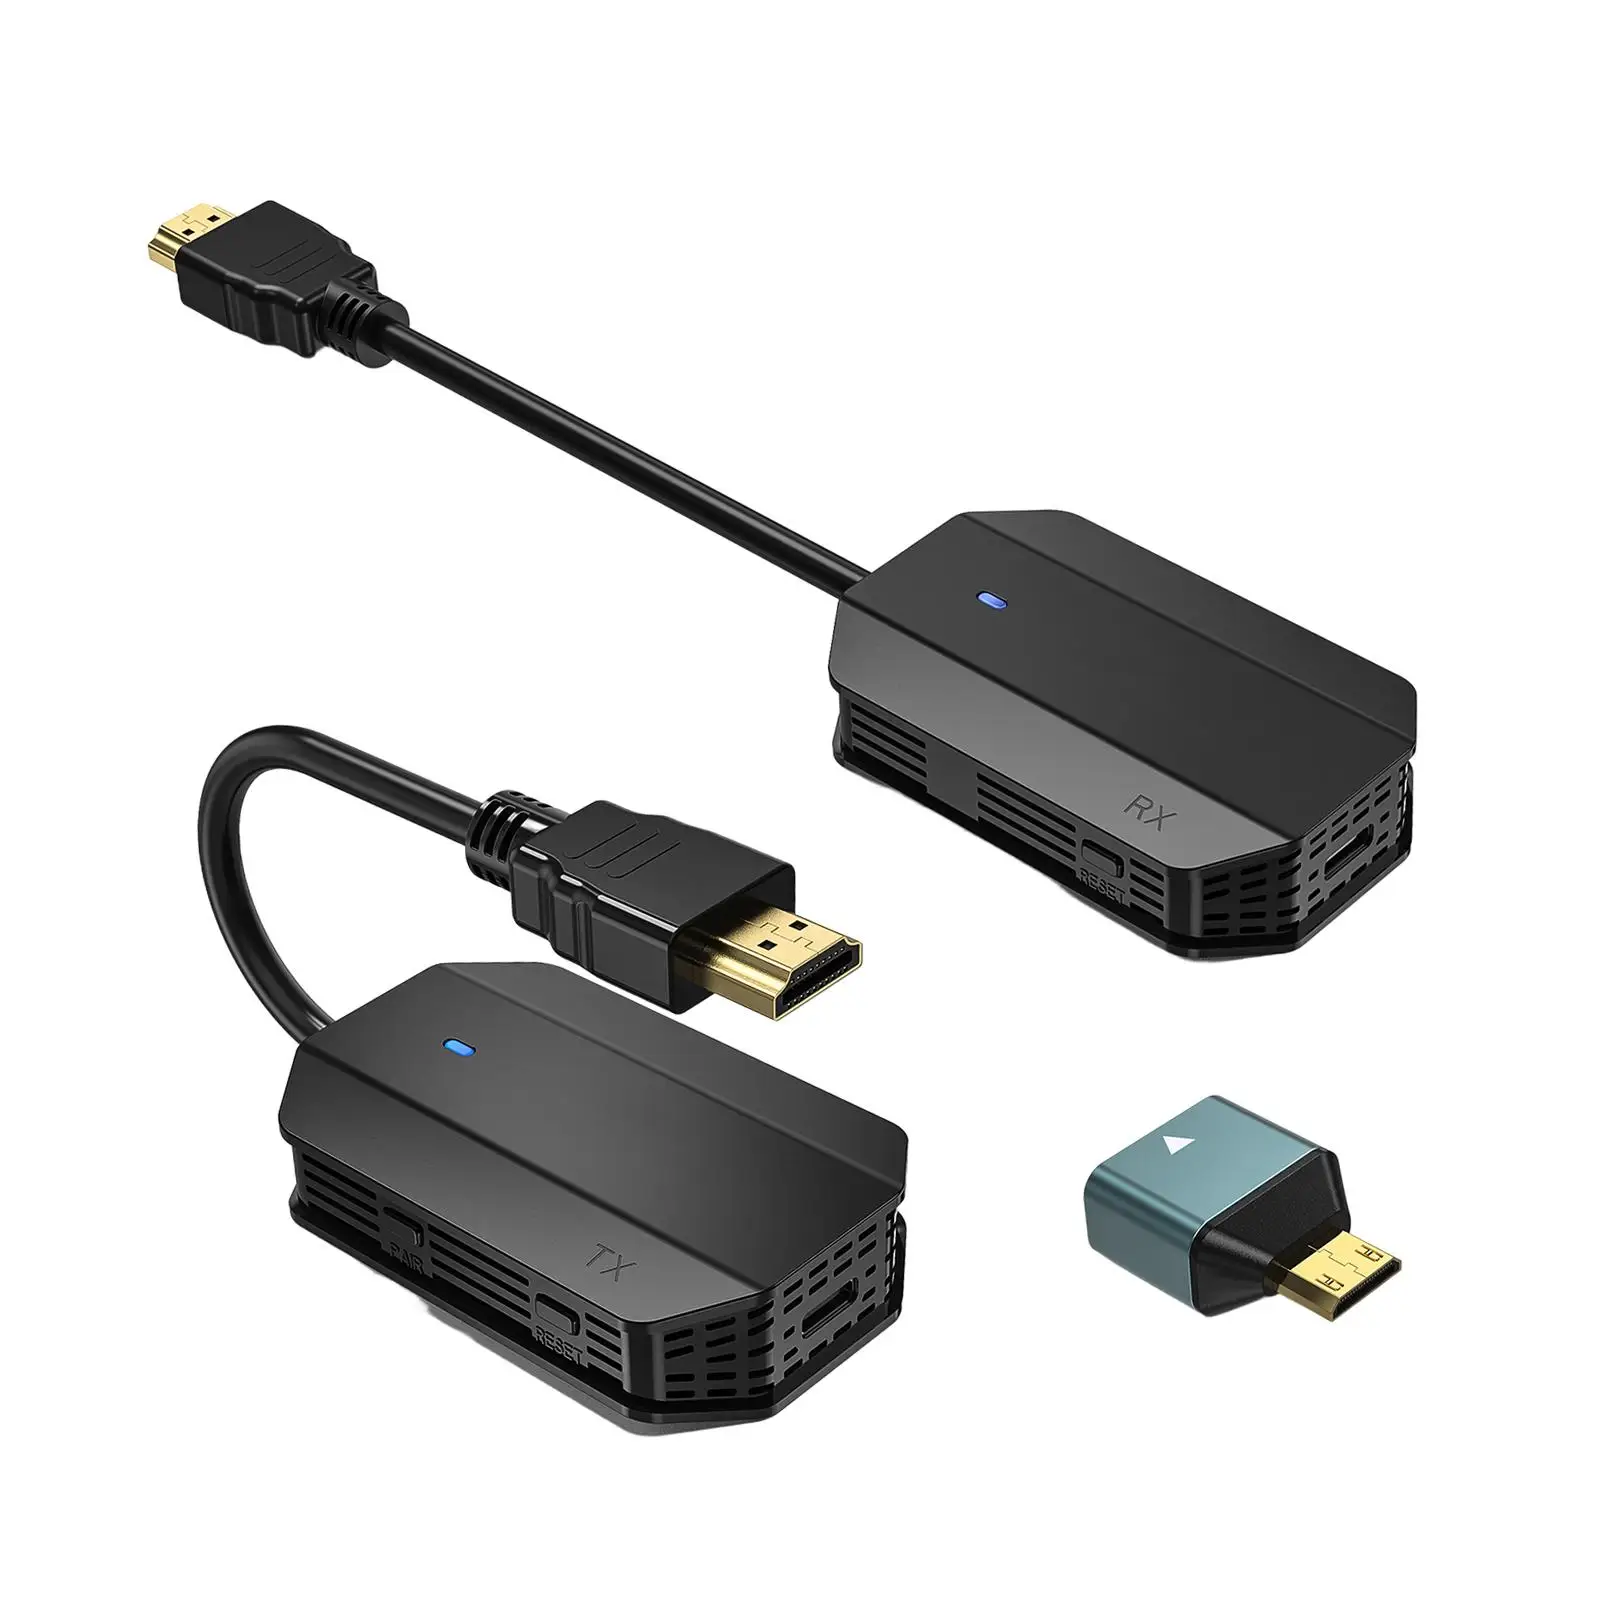 HDMI Transmitter and Receiver Portable HDMI Wireless Video Sharing Device HDMI Adapter for Laptop Camera Projector HDTV